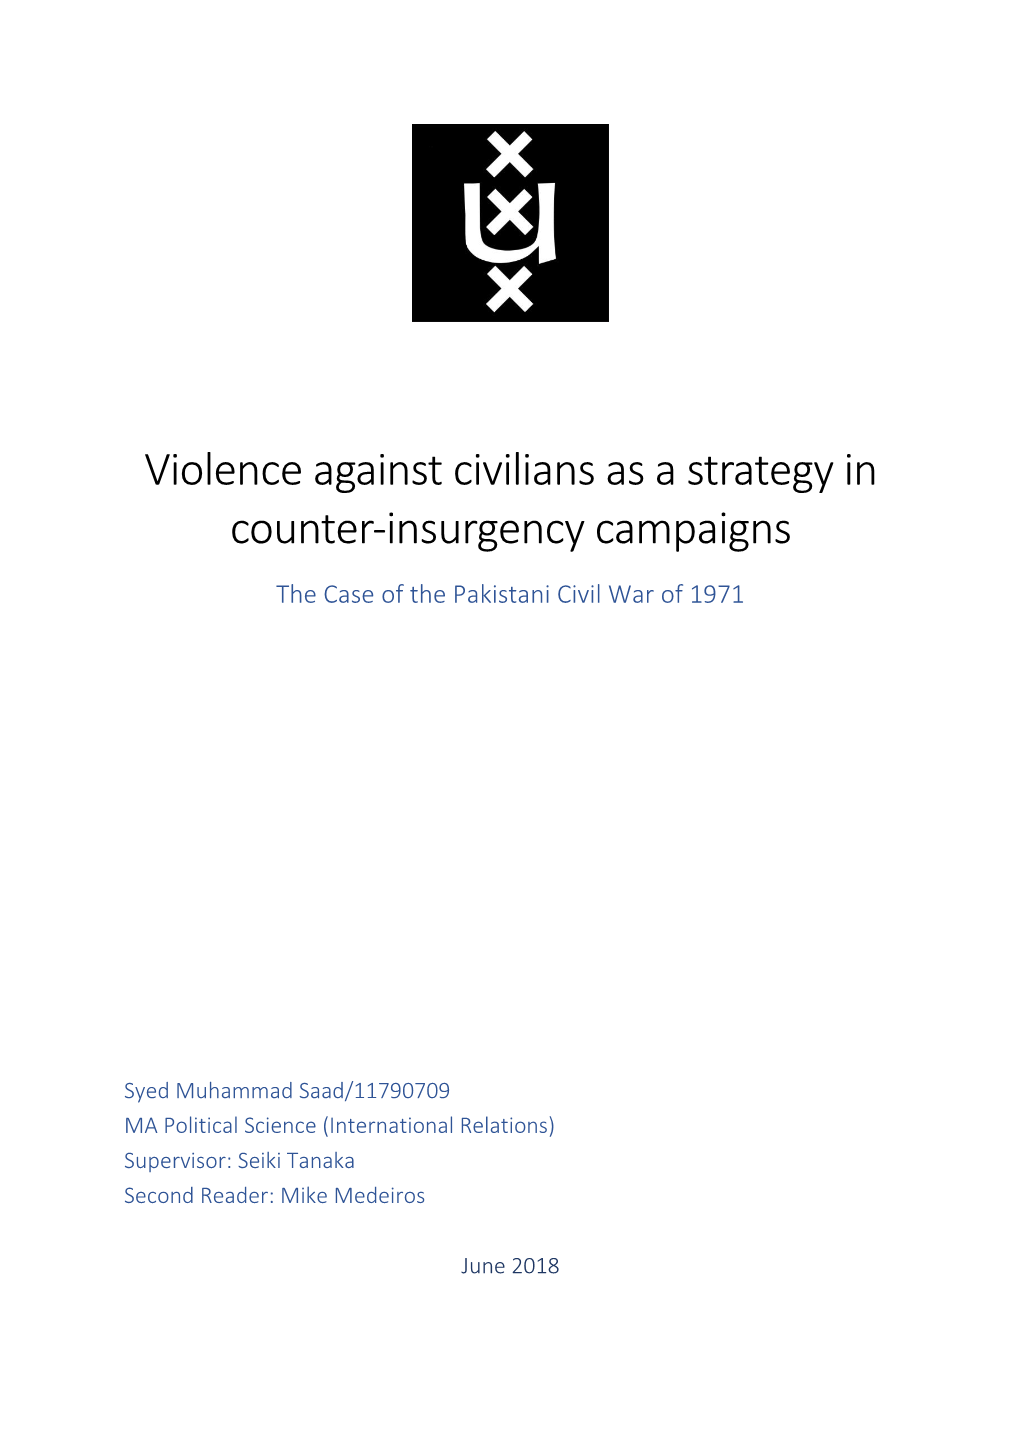 Violence Against Civilians As a Strategy in Counter-Insurgency Campaigns the Case of the Pakistani Civil War of 1971